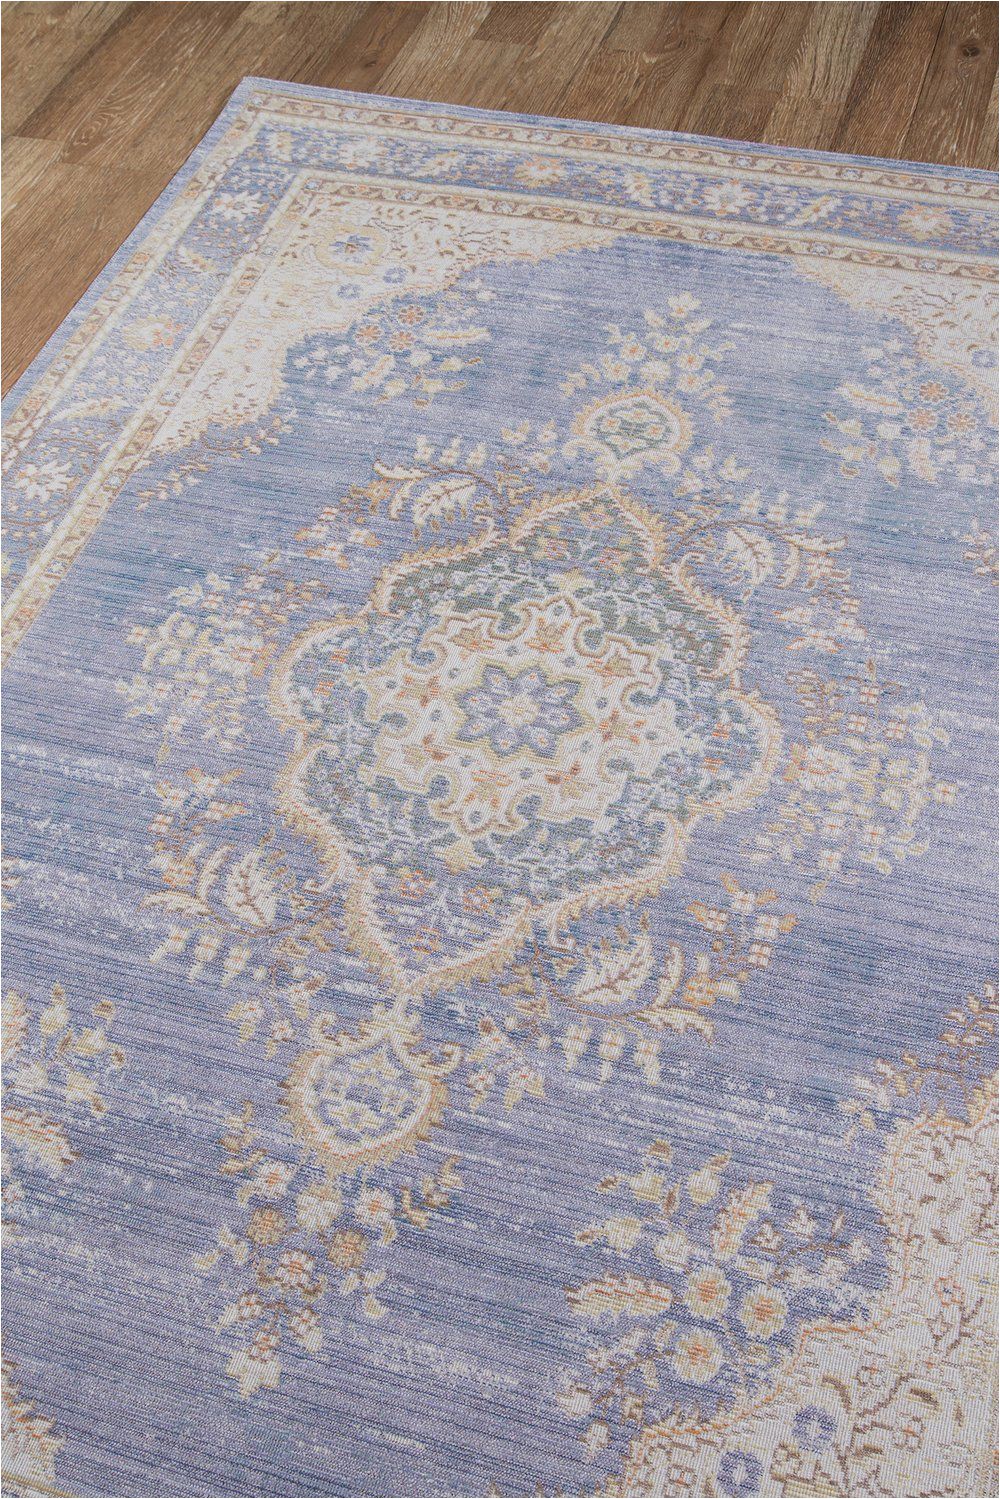 Periwinkle Blue area Rug Periwinkle Lavender Blue Shabby Chic Rug Woodwaves